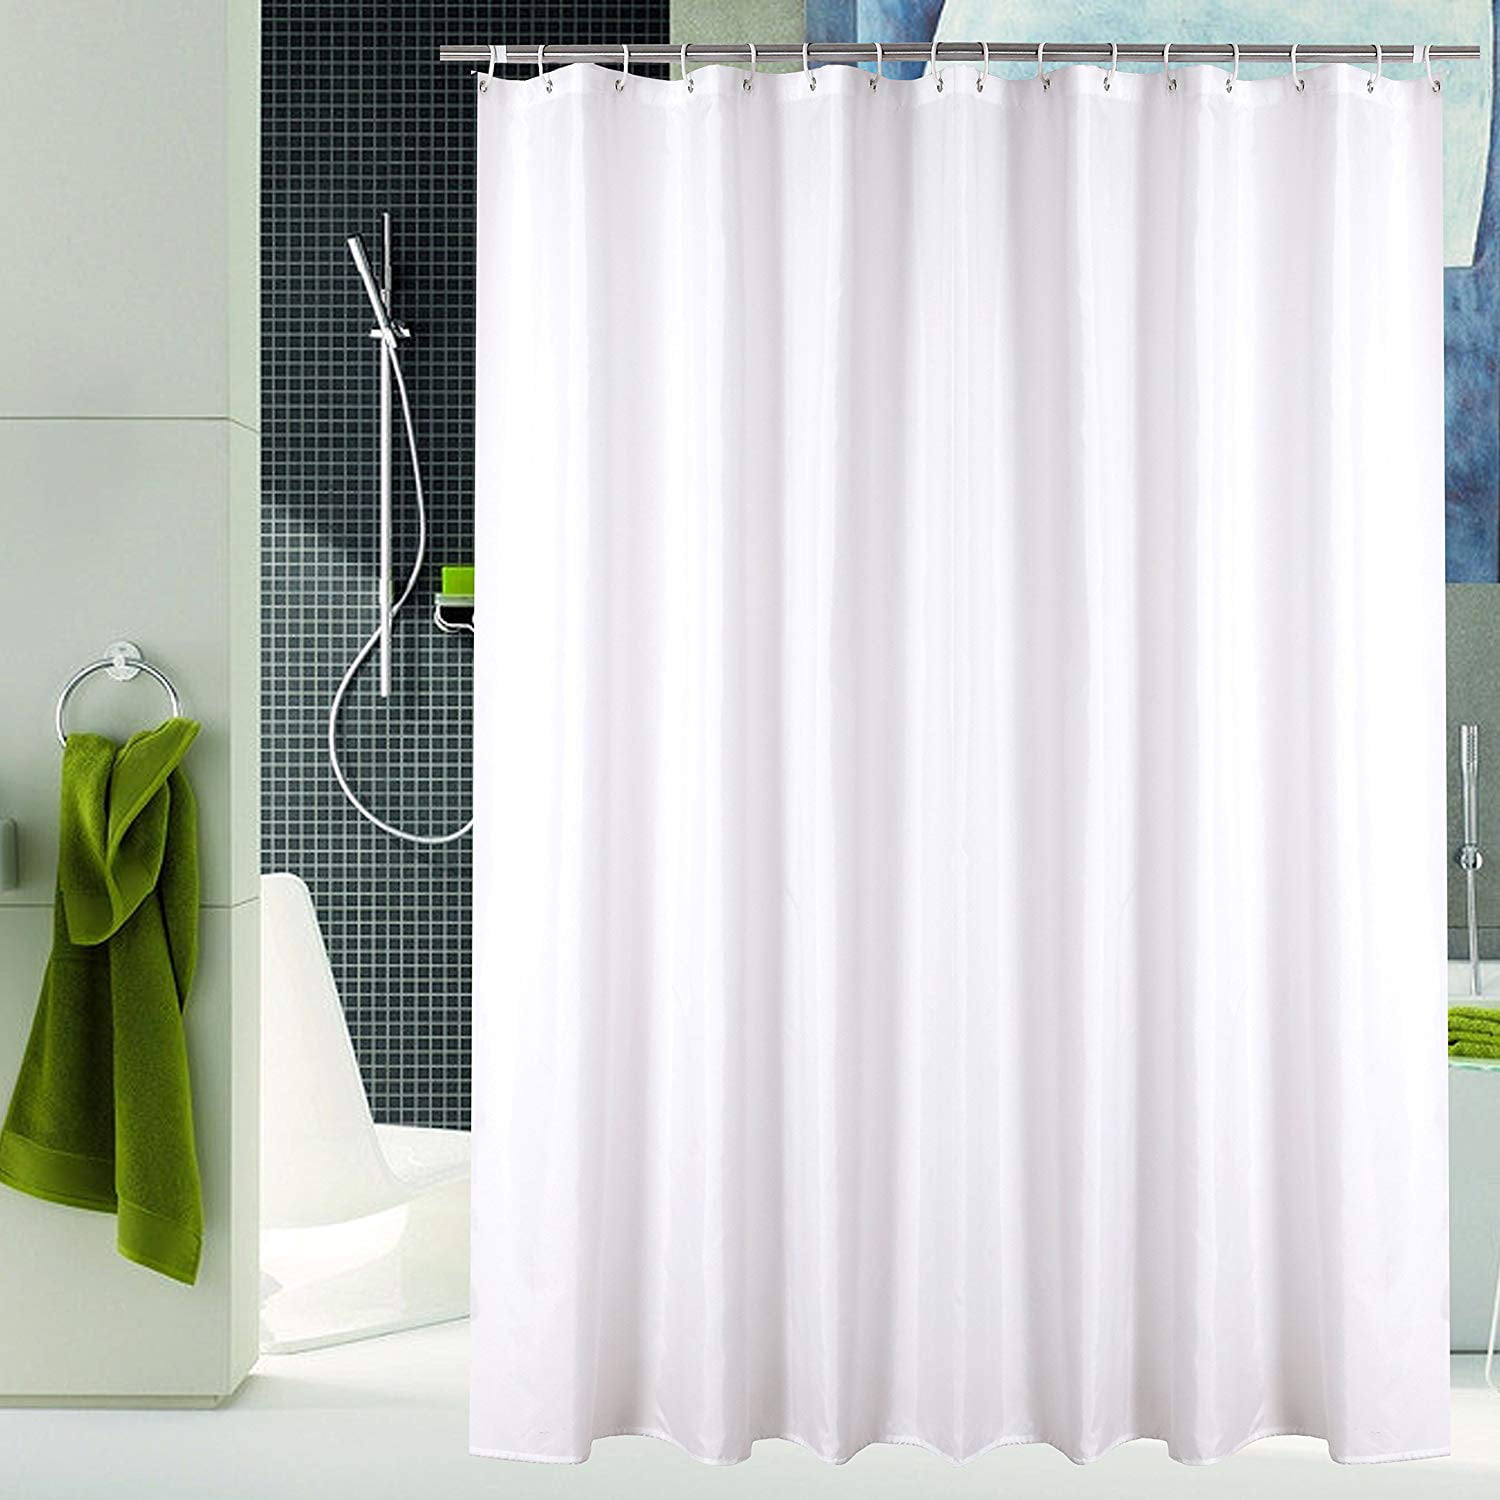 Yuunity Mildew Resistant Polyester, Non Toxic Shower Curtain Uk